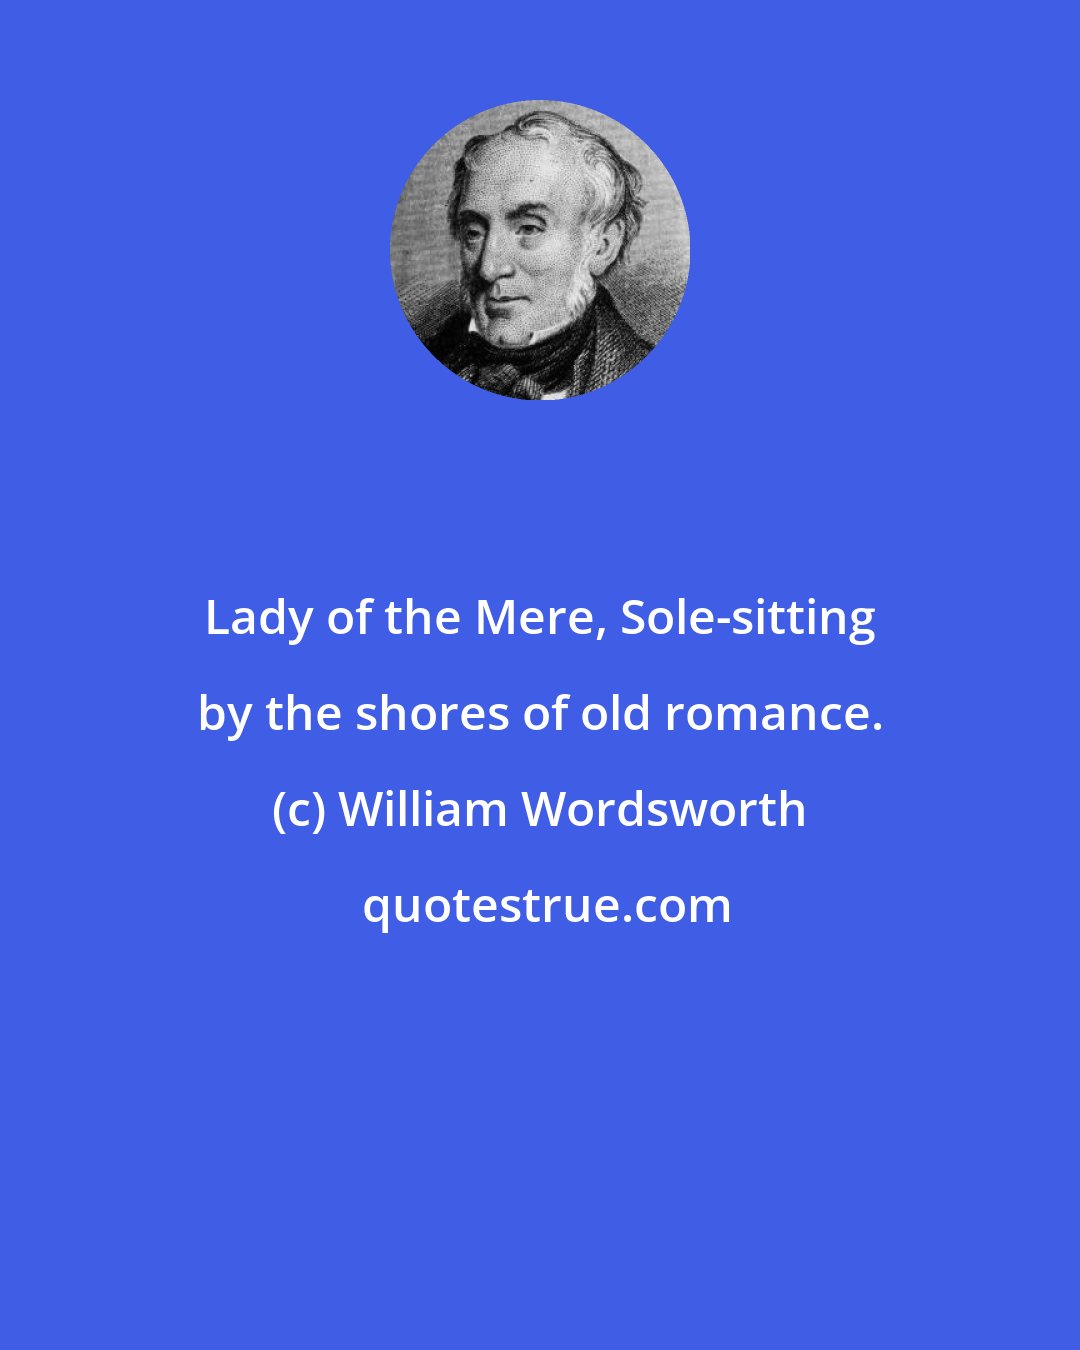 William Wordsworth: Lady of the Mere, Sole-sitting by the shores of old romance.